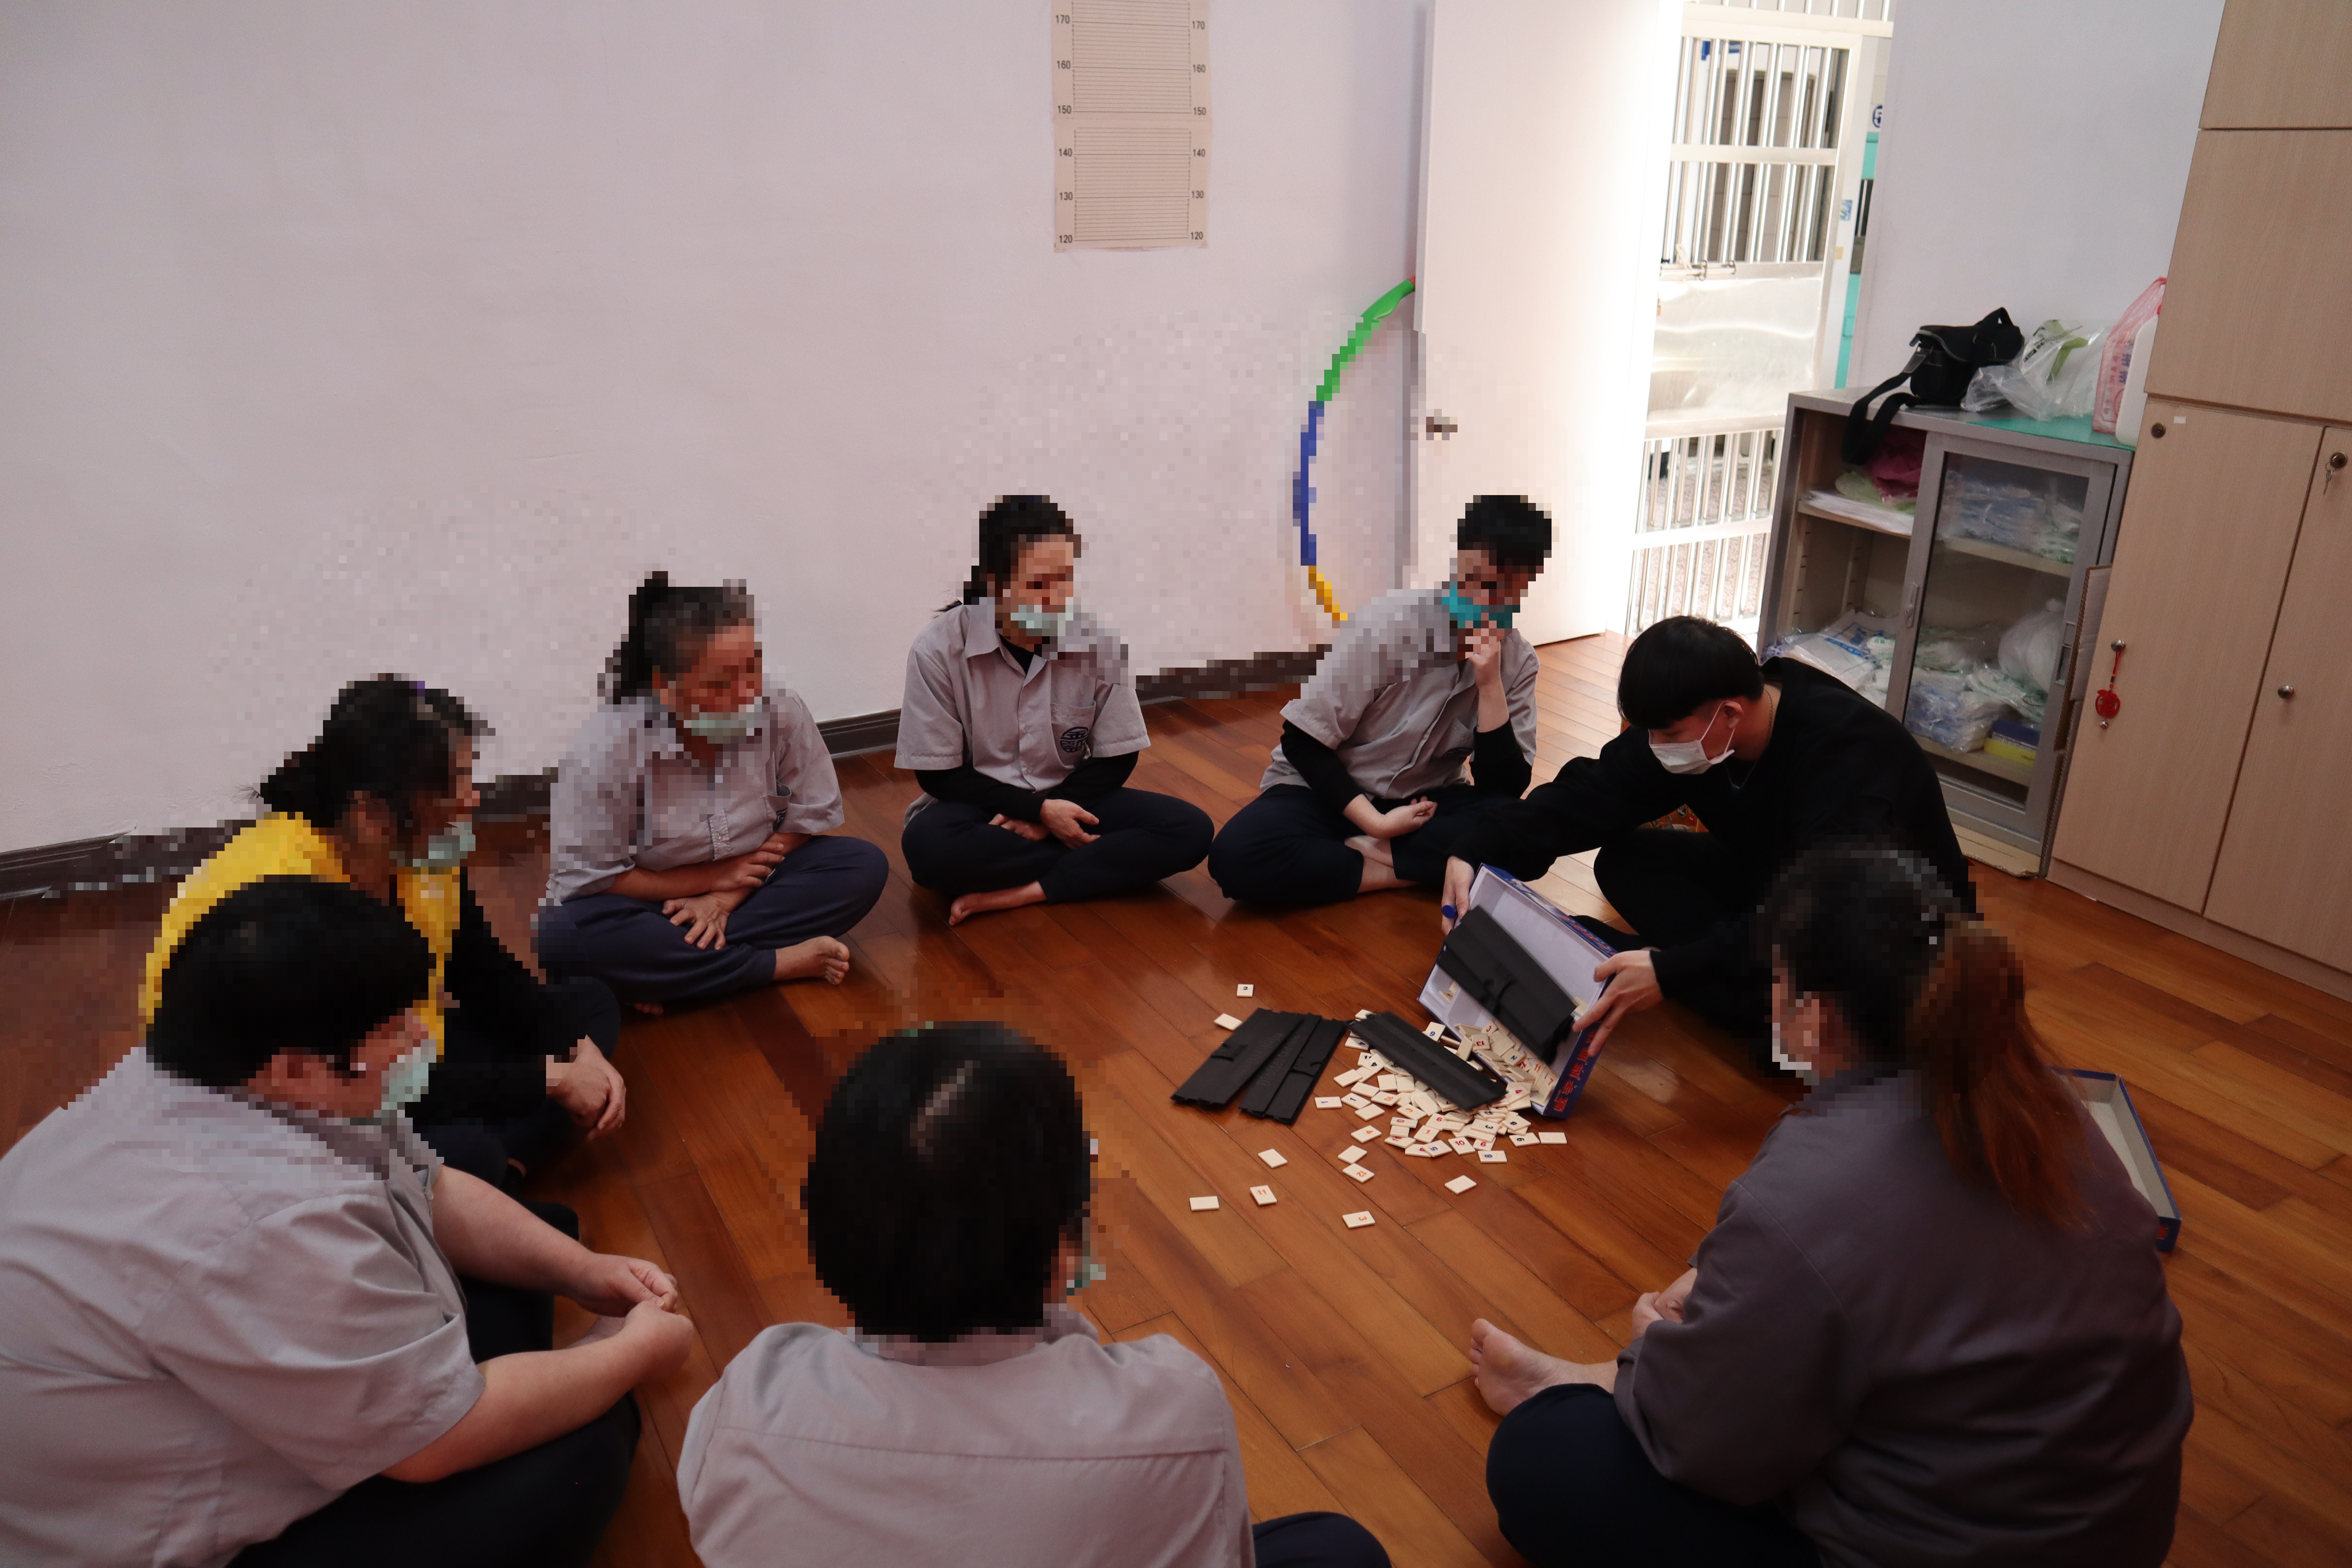 Social workers use board games to interact with inmates